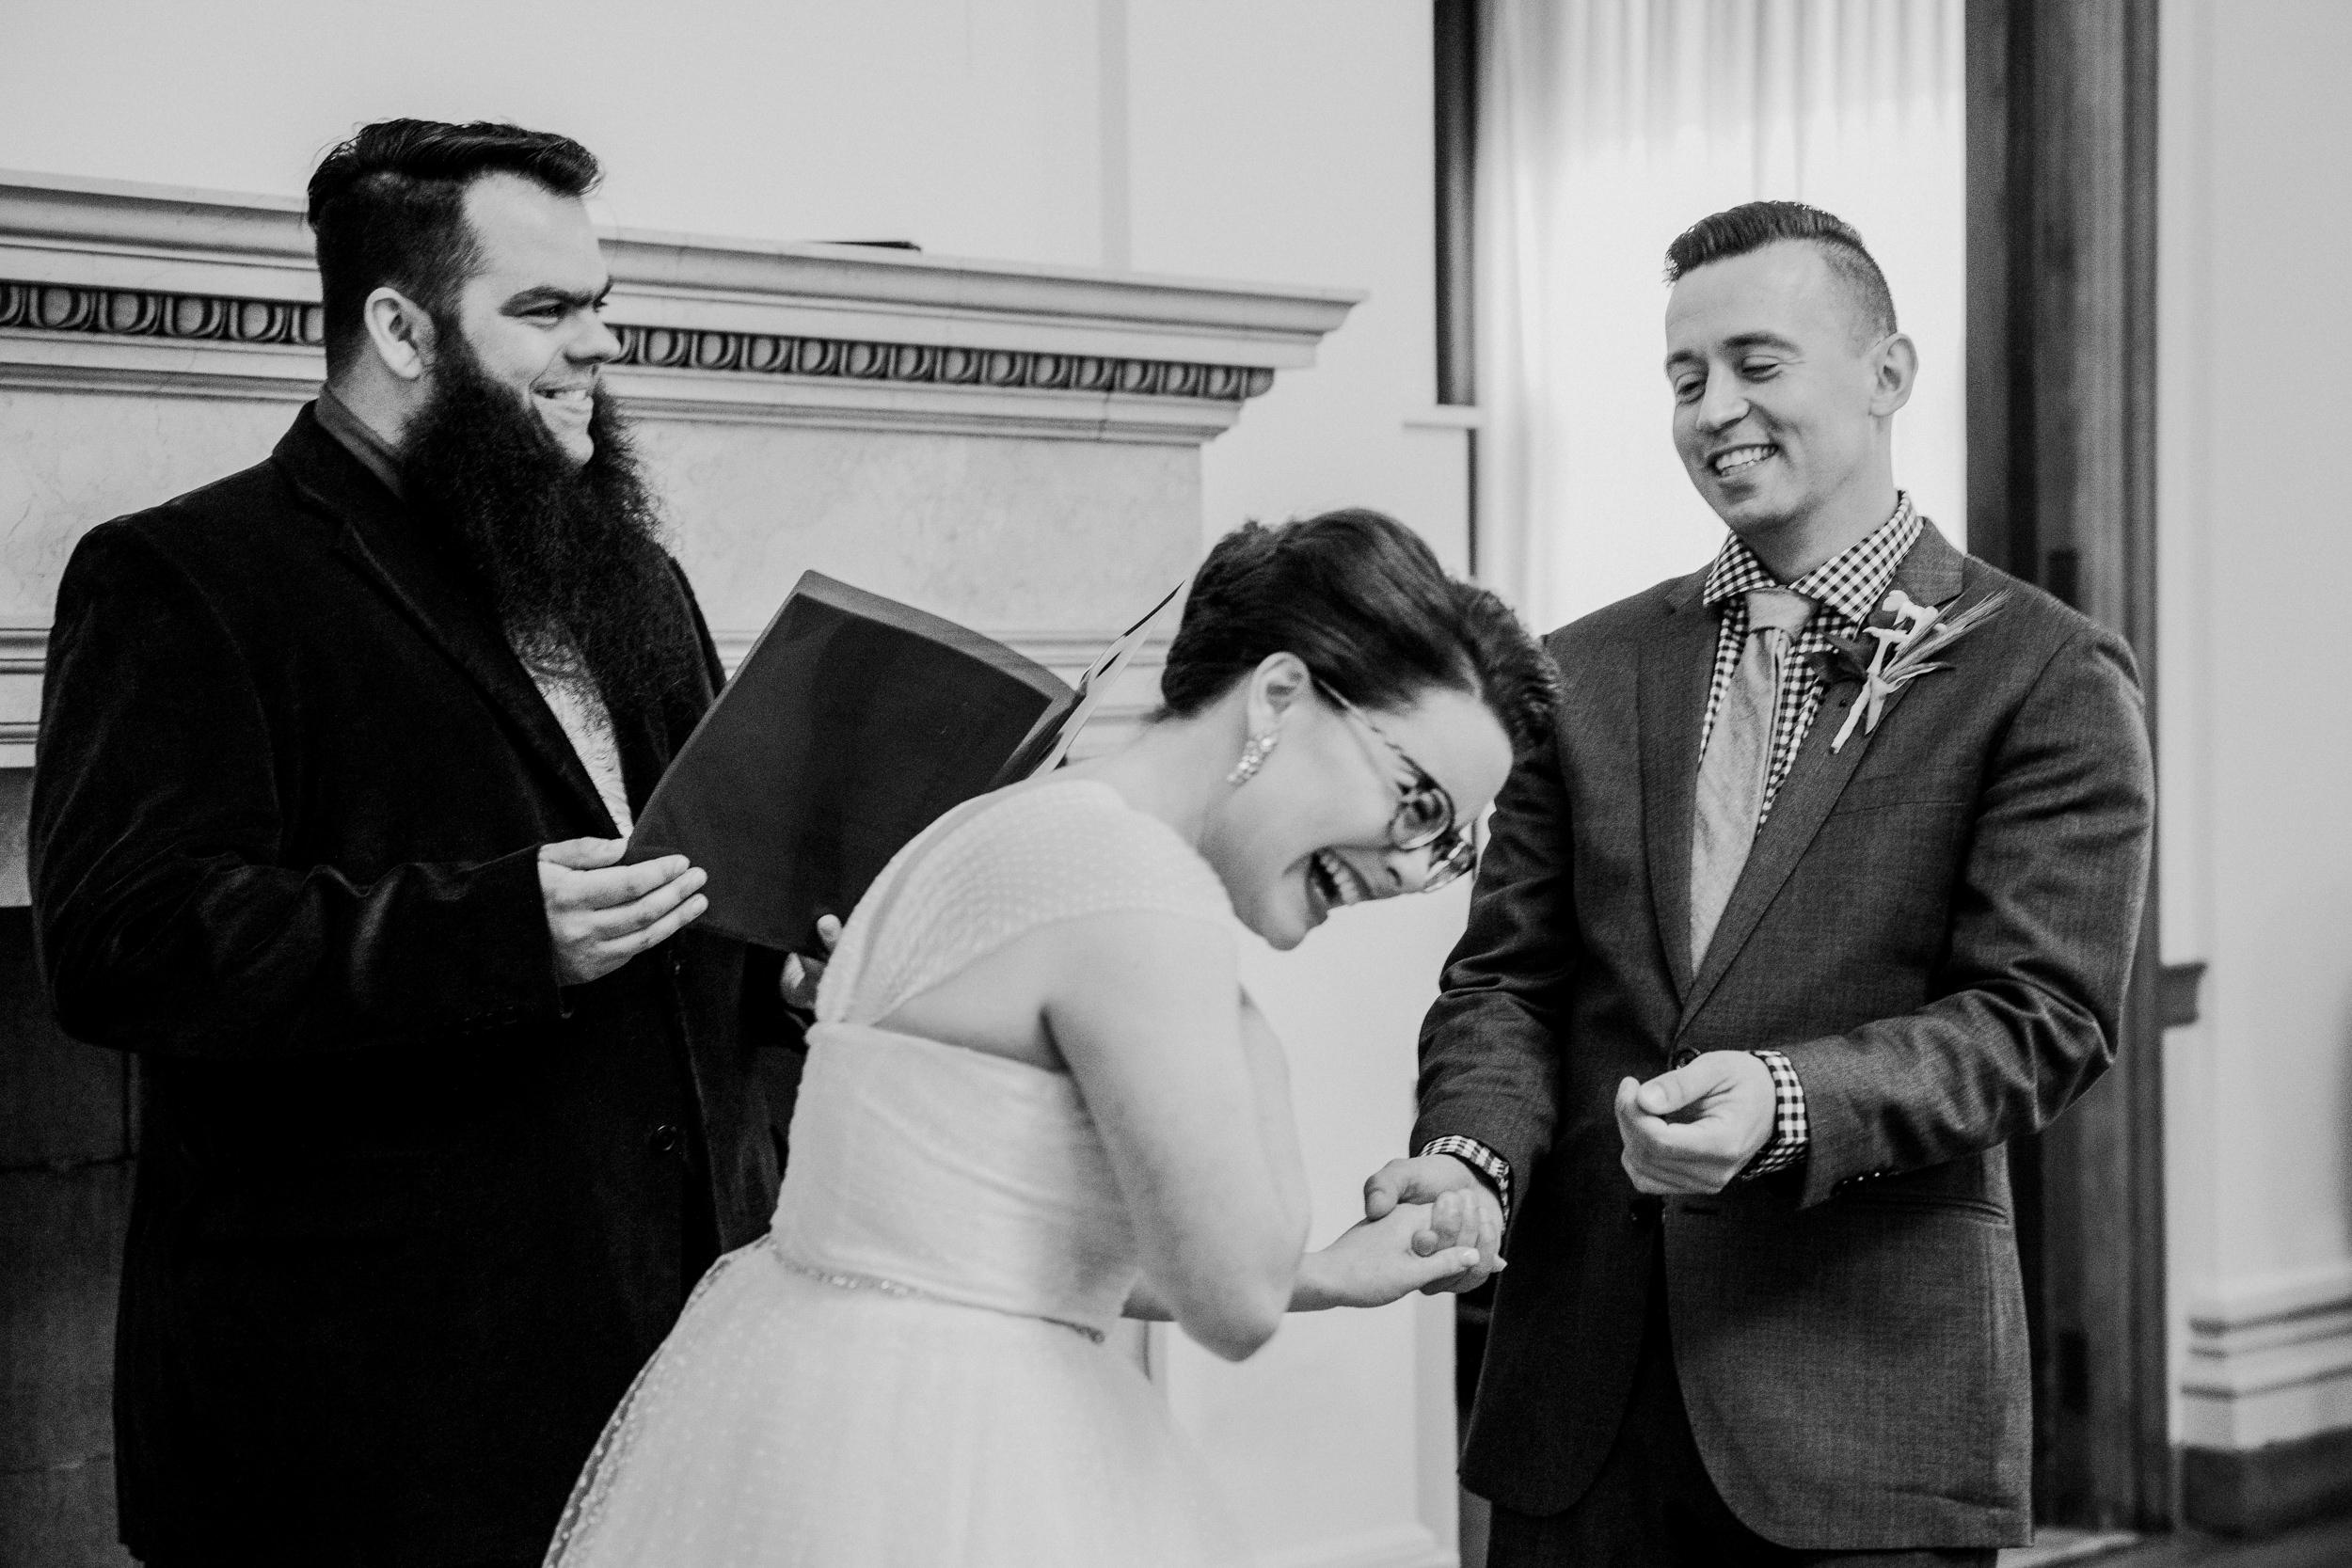  A bride and groom elope at City Hall in Portland 